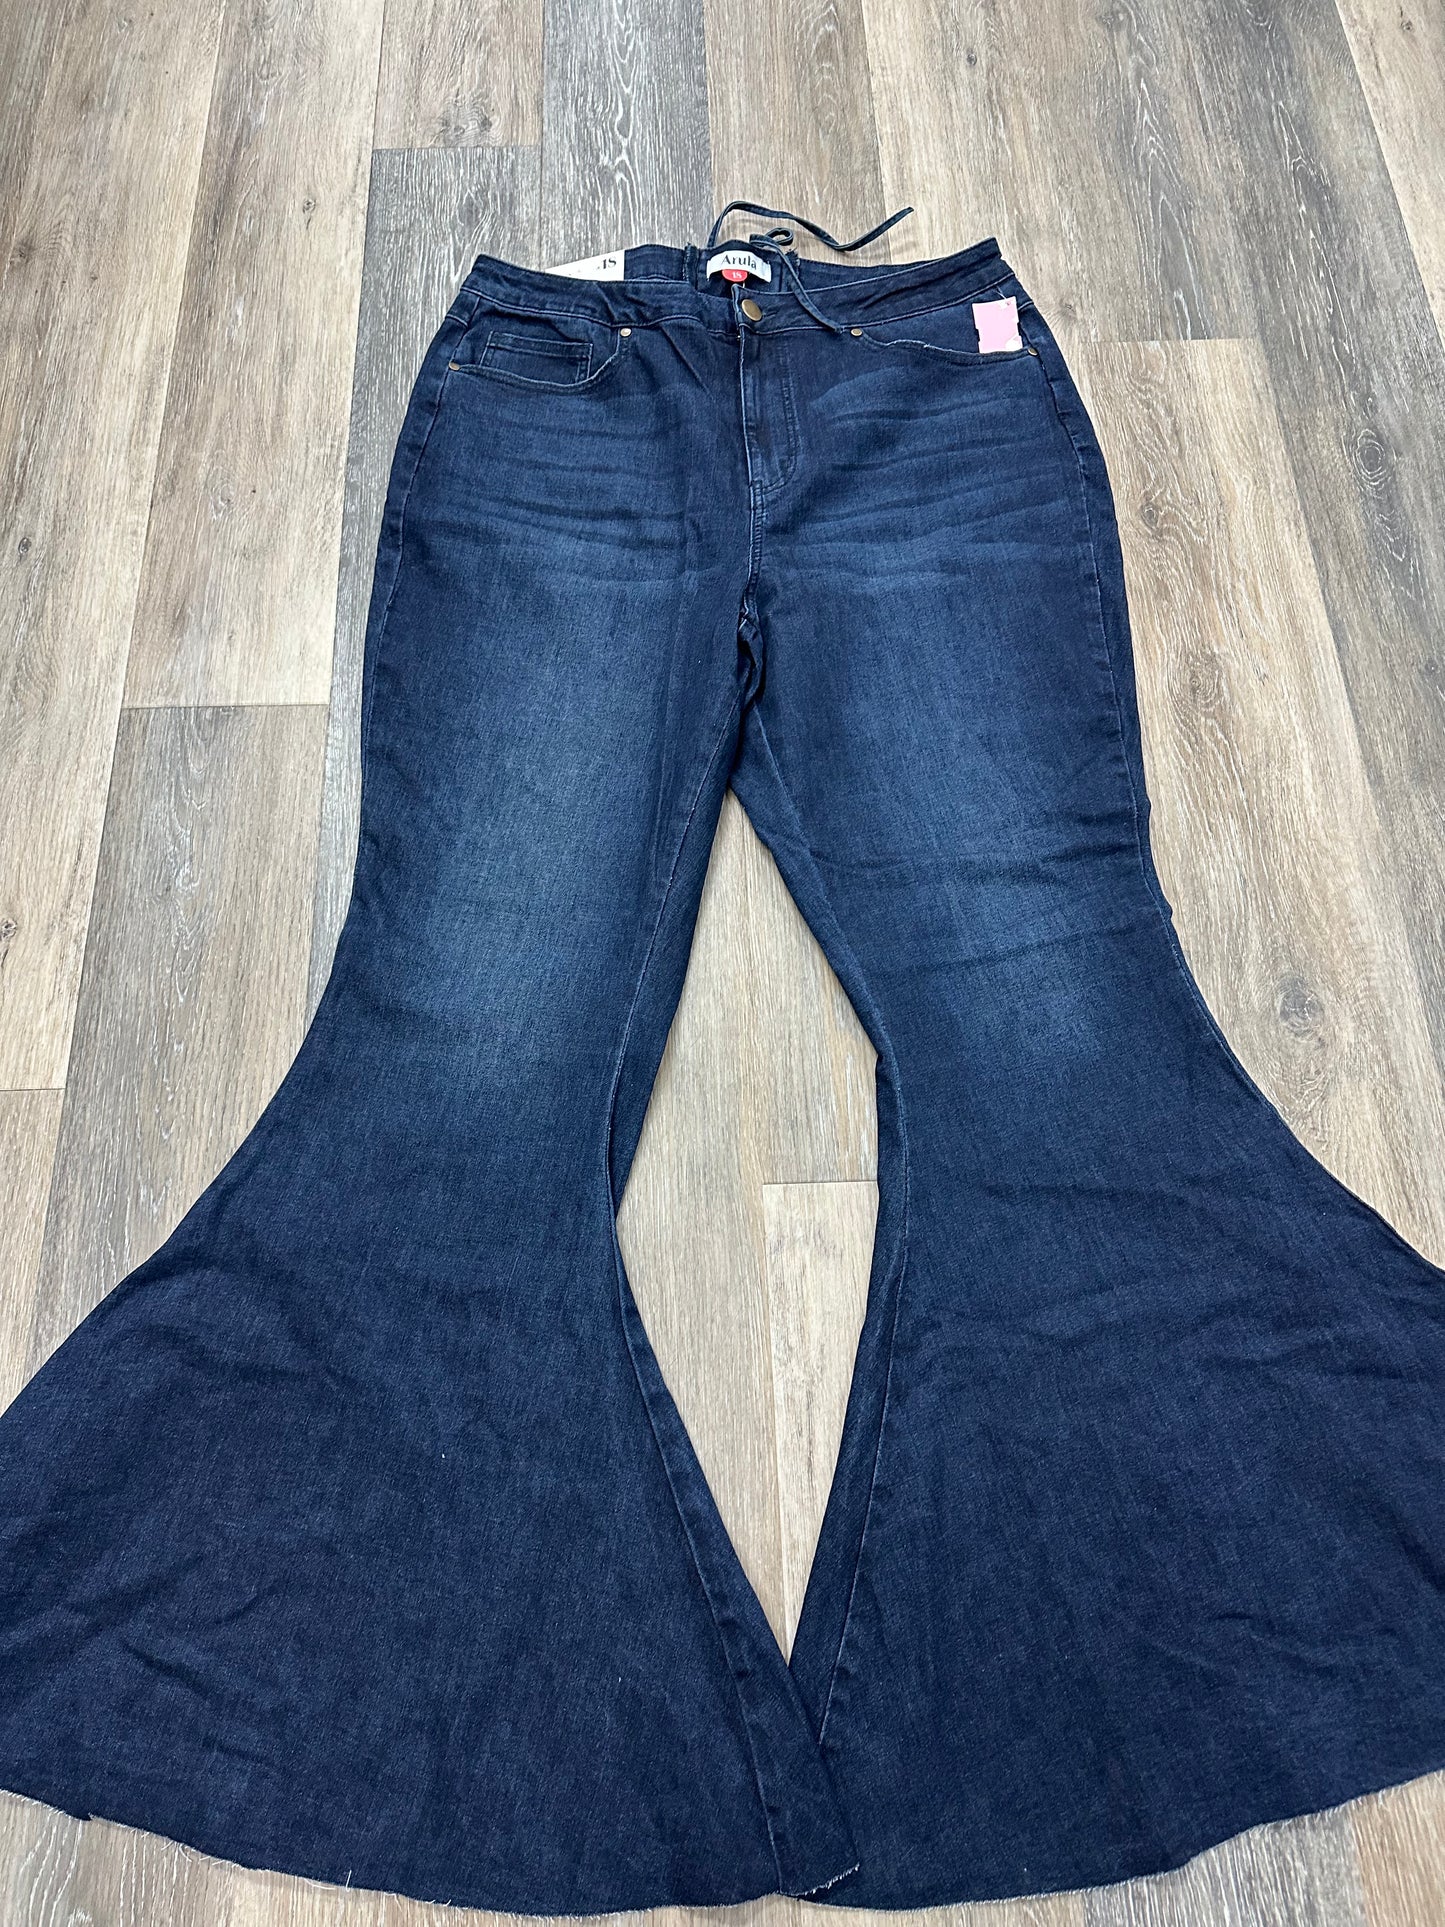 Jeans Flared By Arula  Size: 18